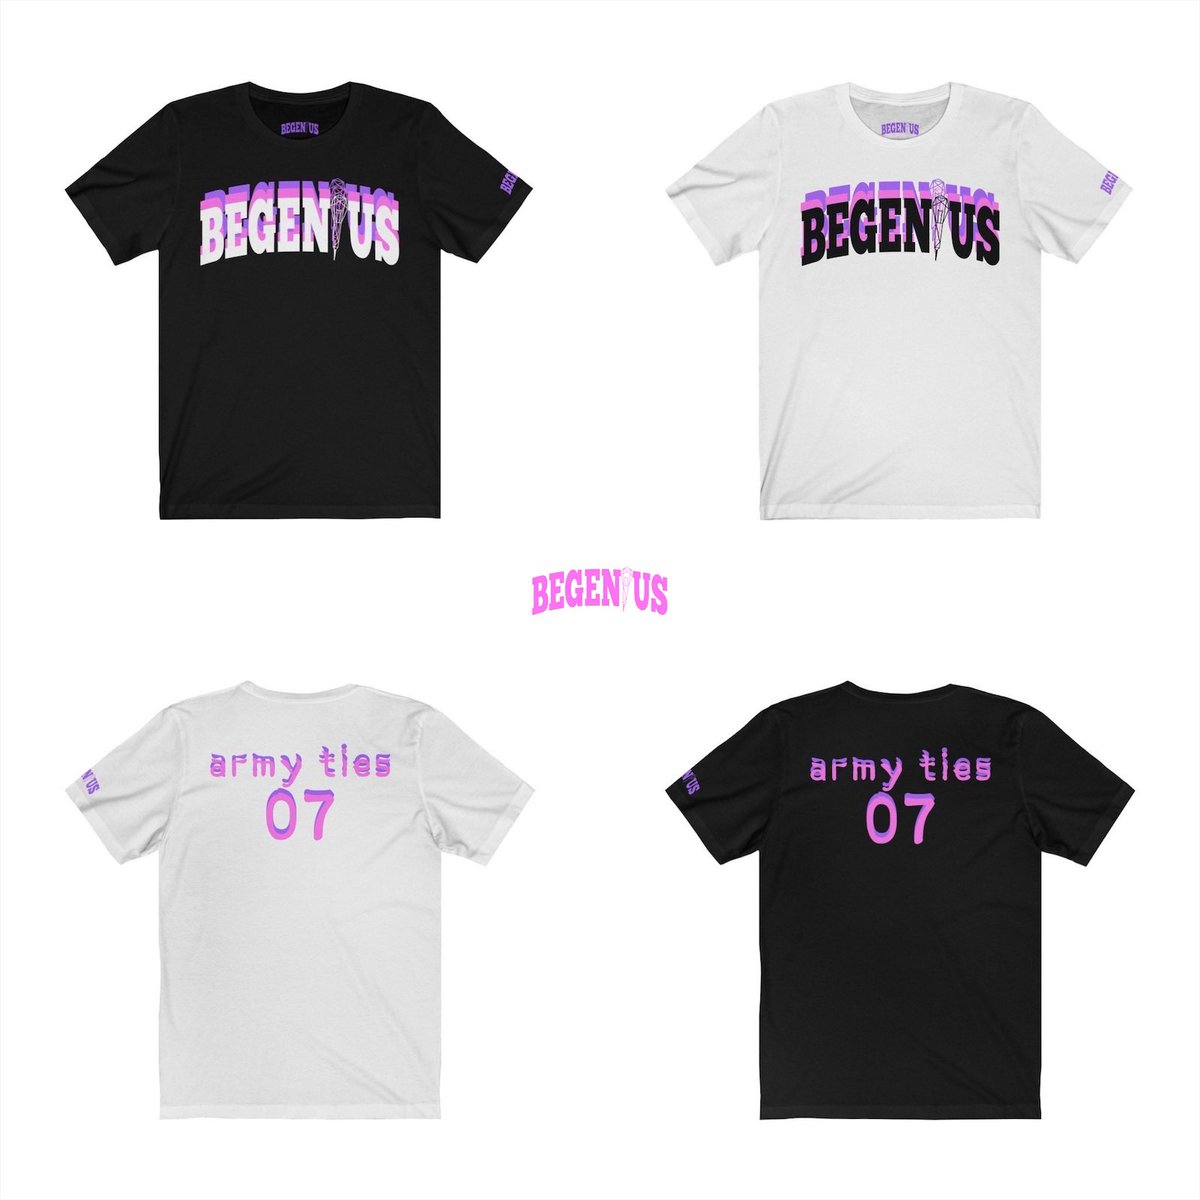  https://everythingbegenius.com/products/unisex-begenius-x-army-logo-t-shirtSomething special for my BTS ARMY!